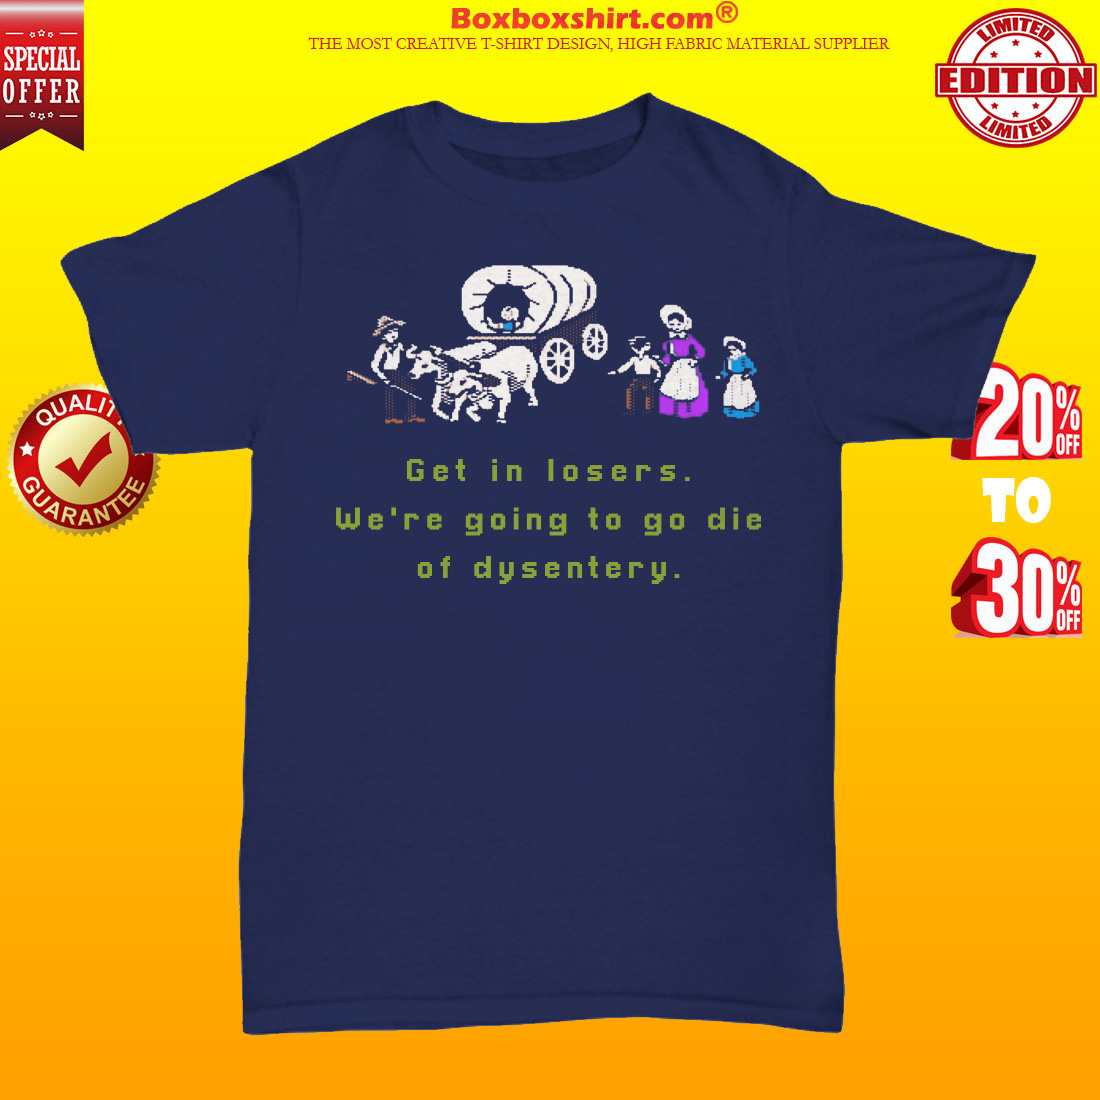 Get in losers we are going to go die of dysentery unisex tee shirt